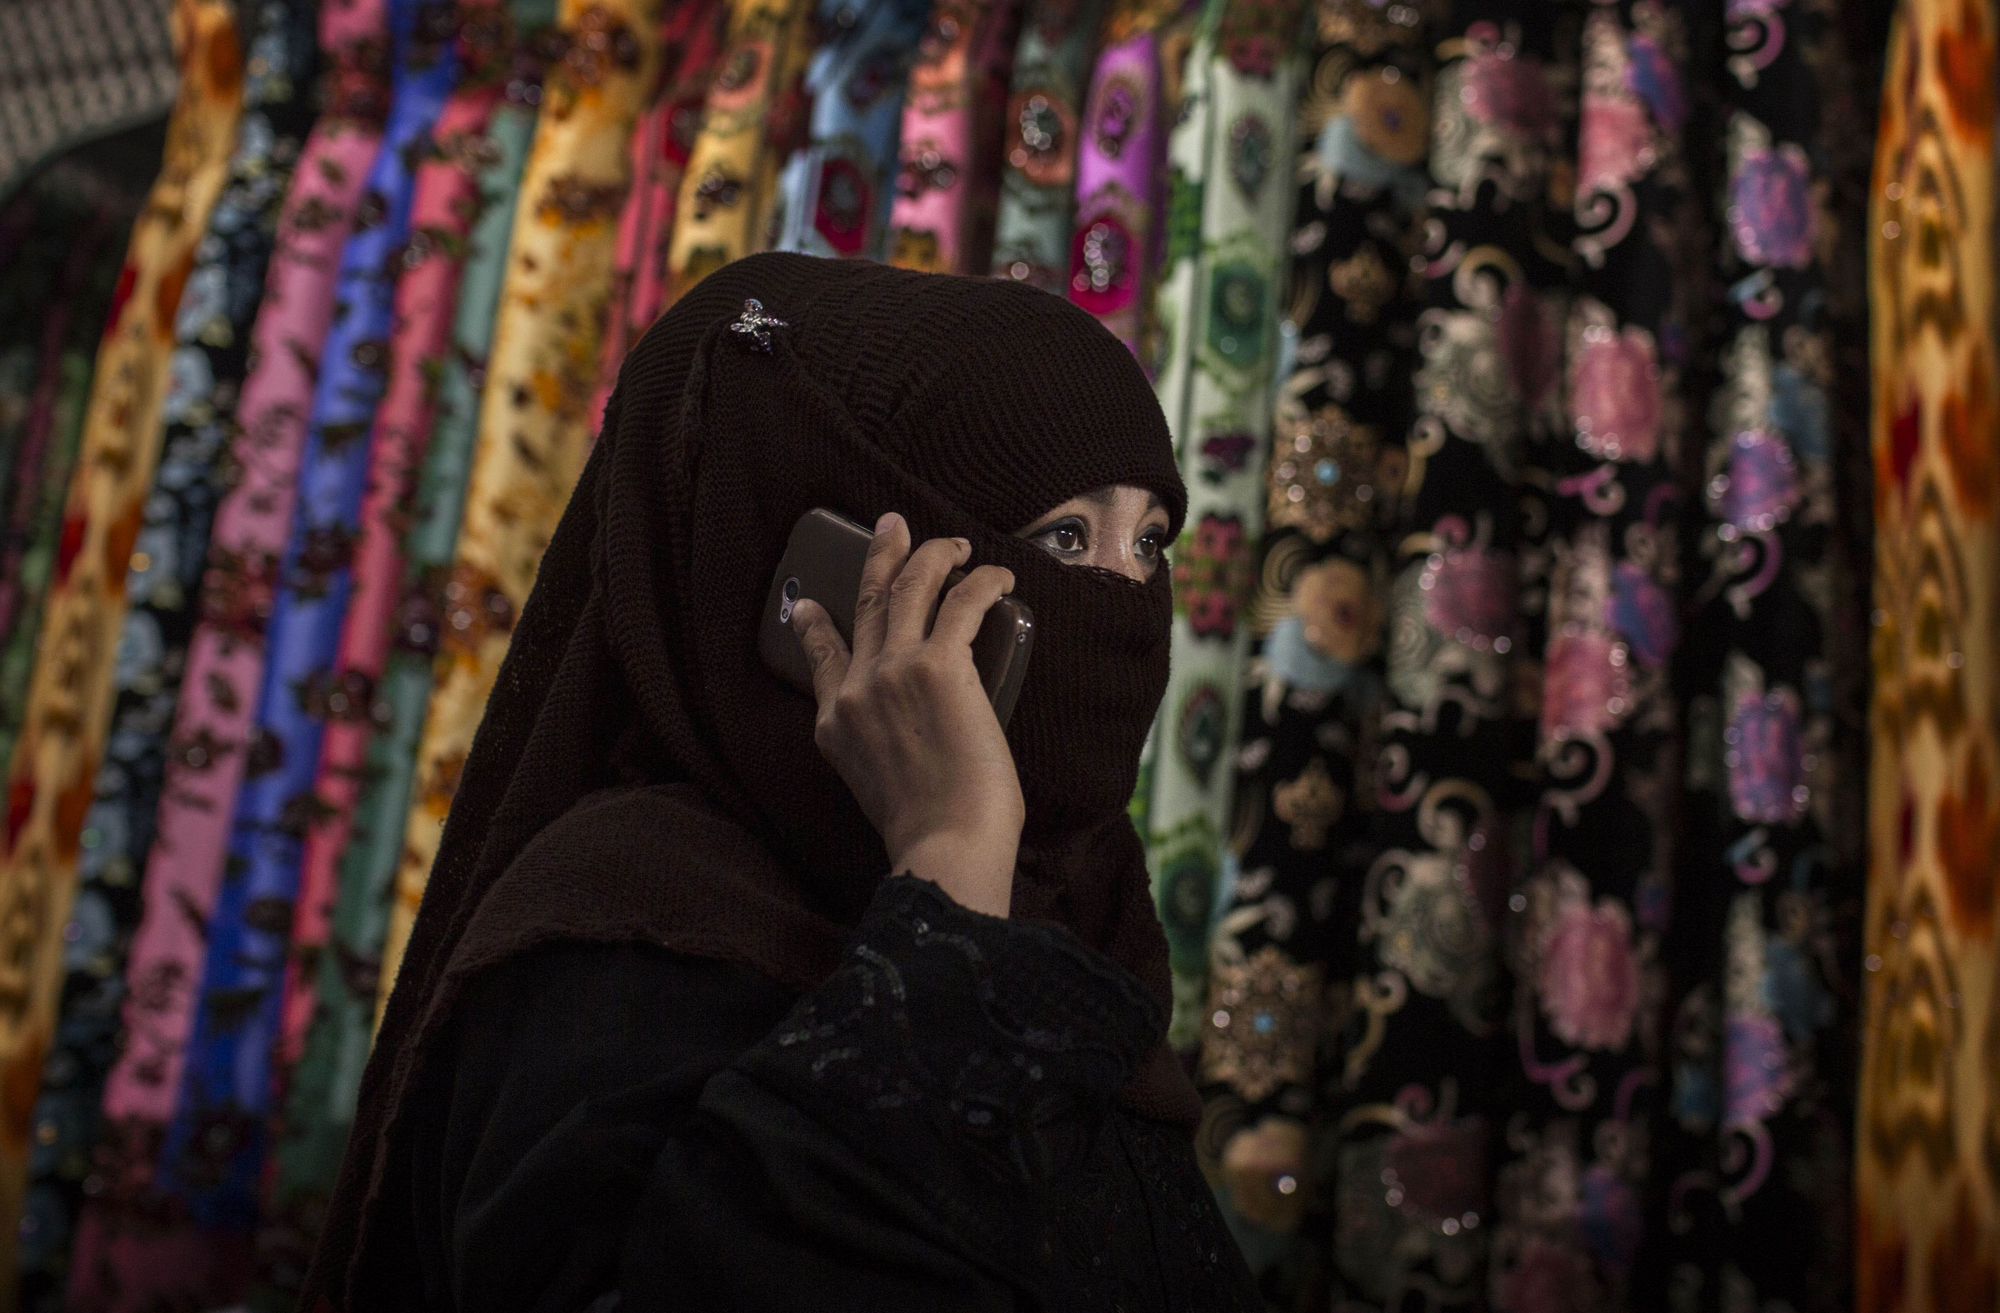 A Uyghur woman wears a veil as she shops at a local market on August 2, 2014 in Kashgar.